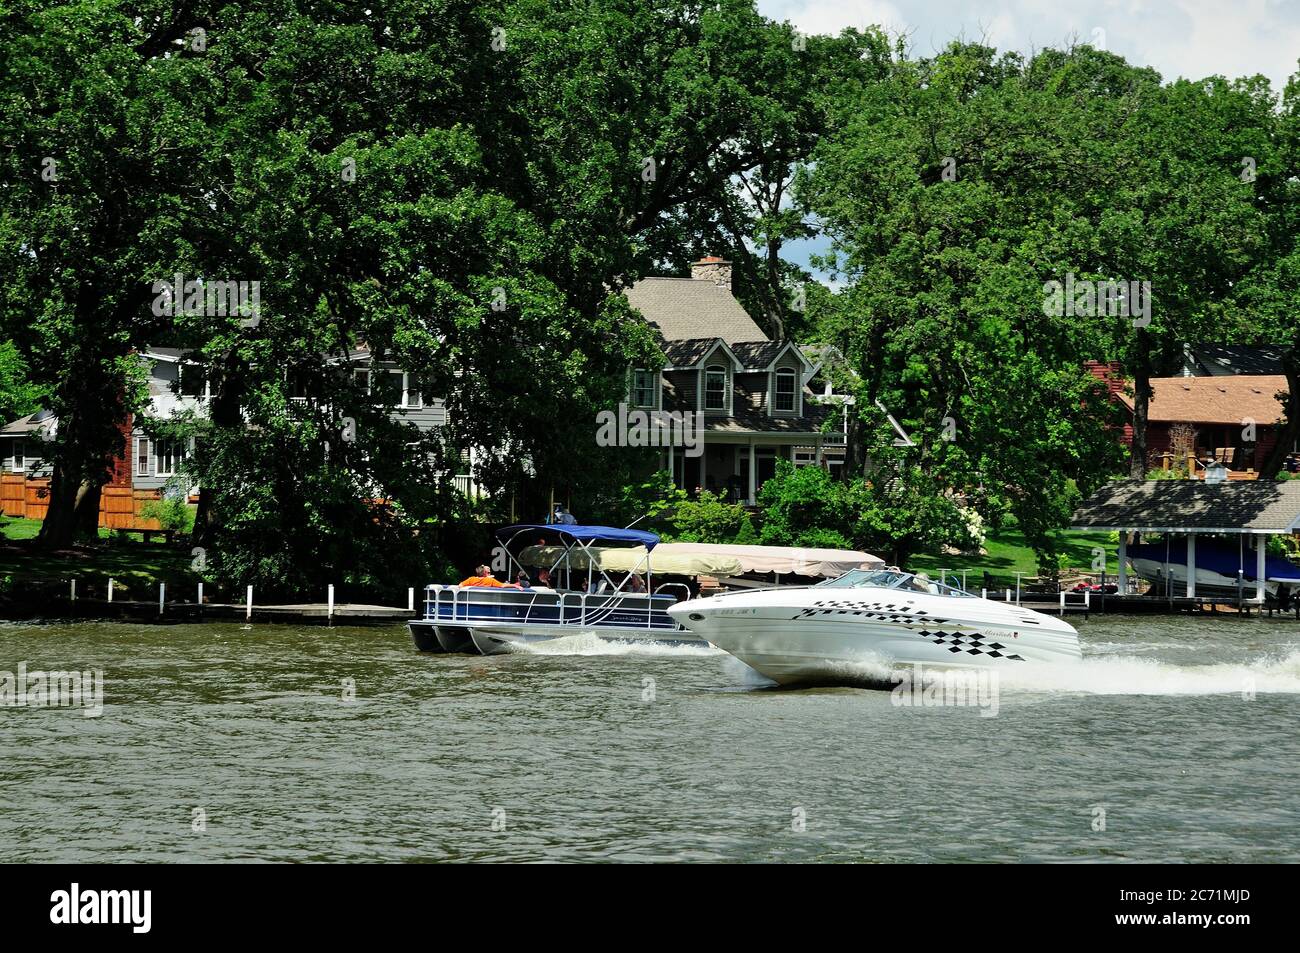 Motorboats.piiers, and boat houses along the Fox River in Northern Illinois, USA. Stock Photo